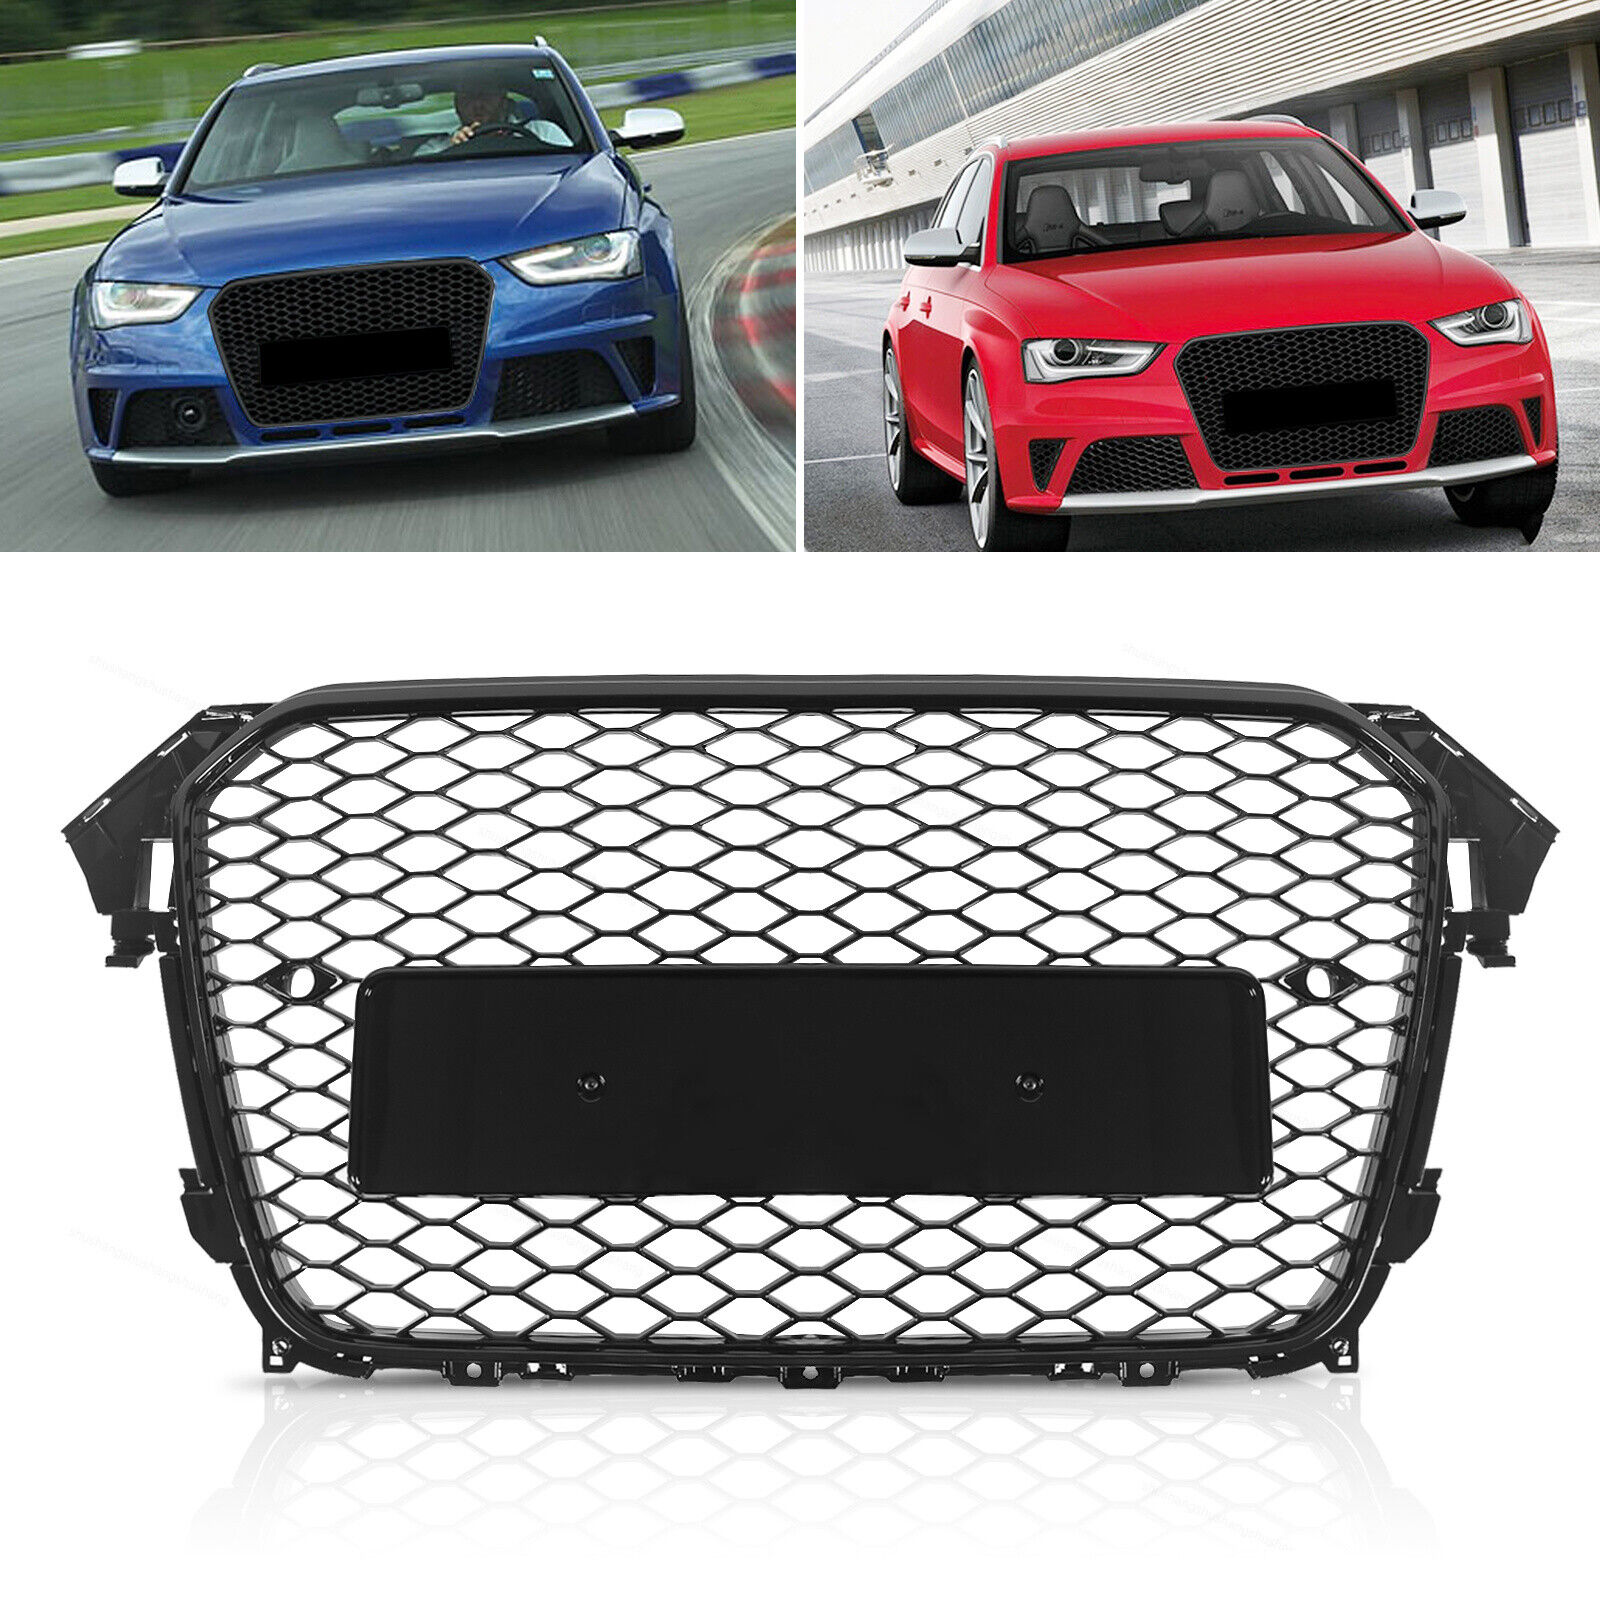 Glossy Black For 2013-2016 Audi A4/S4 RS Honeycomb Mesh Front Hood Bumper Grille